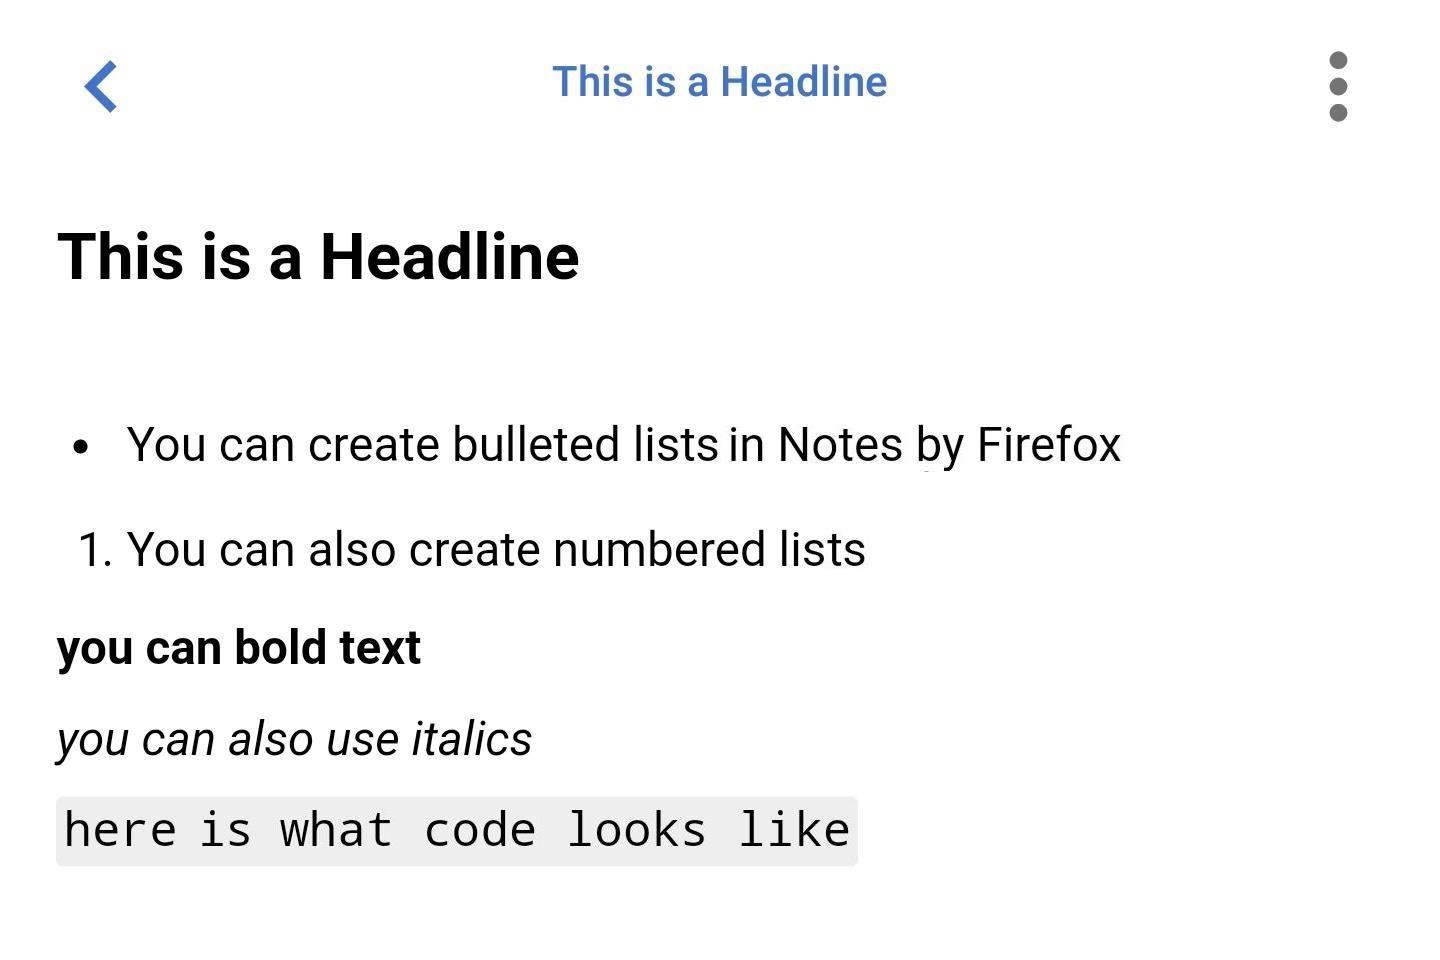 How to Use Firefox's Secure 'Notes' App to Sync Lists & Other Notes to Your Desktop Browser